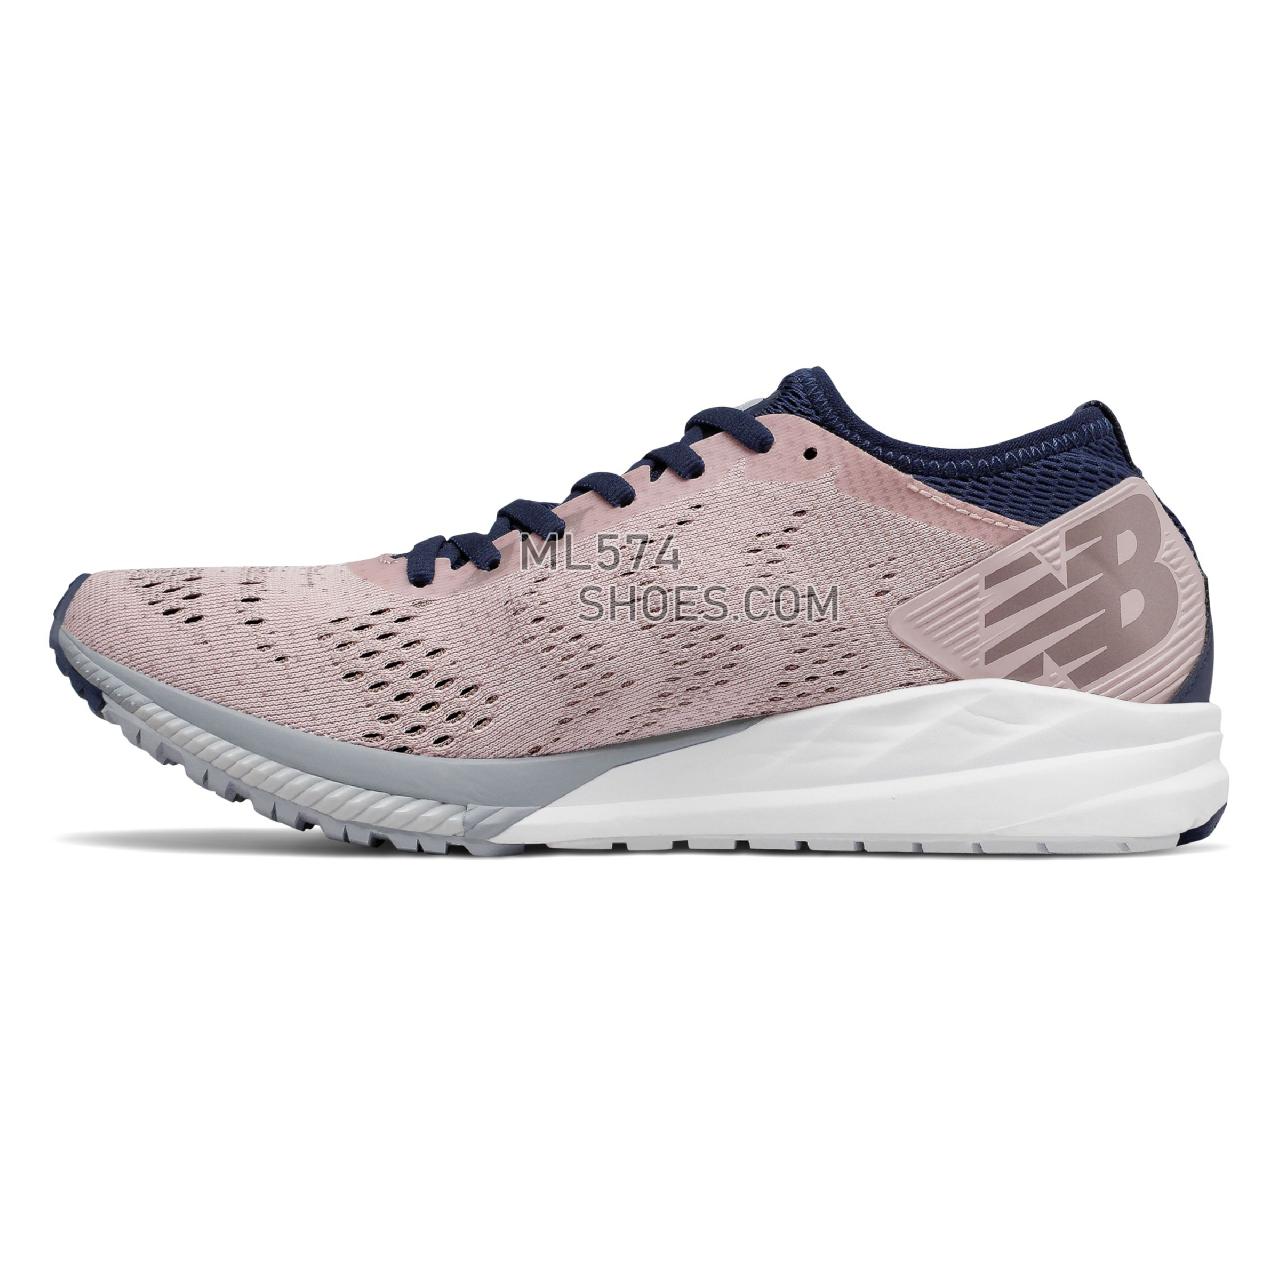 New Balance FuelCell Impulse - Women's  - Running Conch Shell with Light Cyclone - WFCIMPB